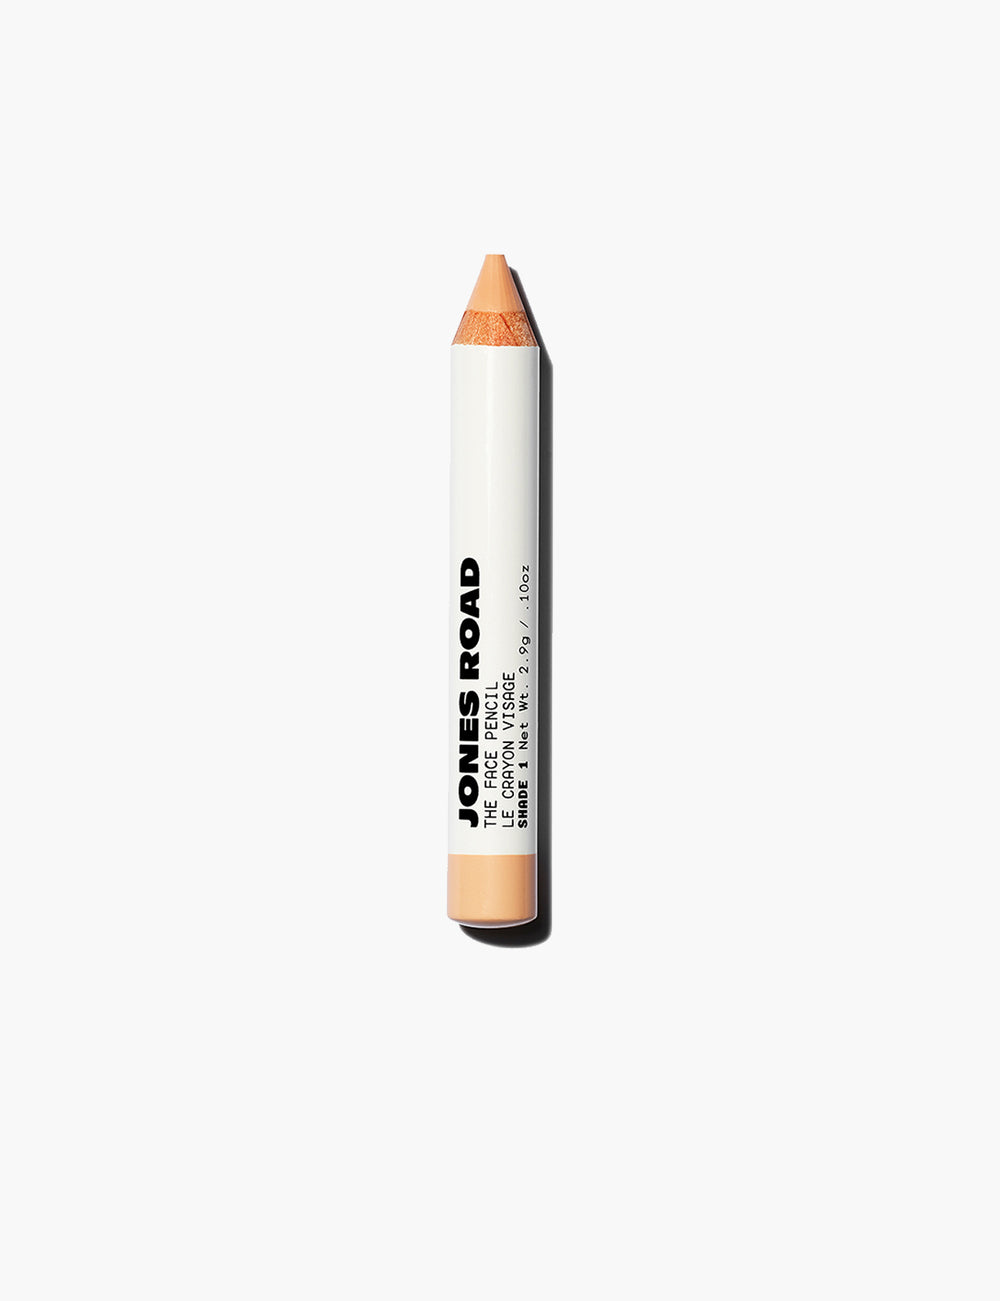 The Face Pencil by Jones Road Beauty in Shade 1